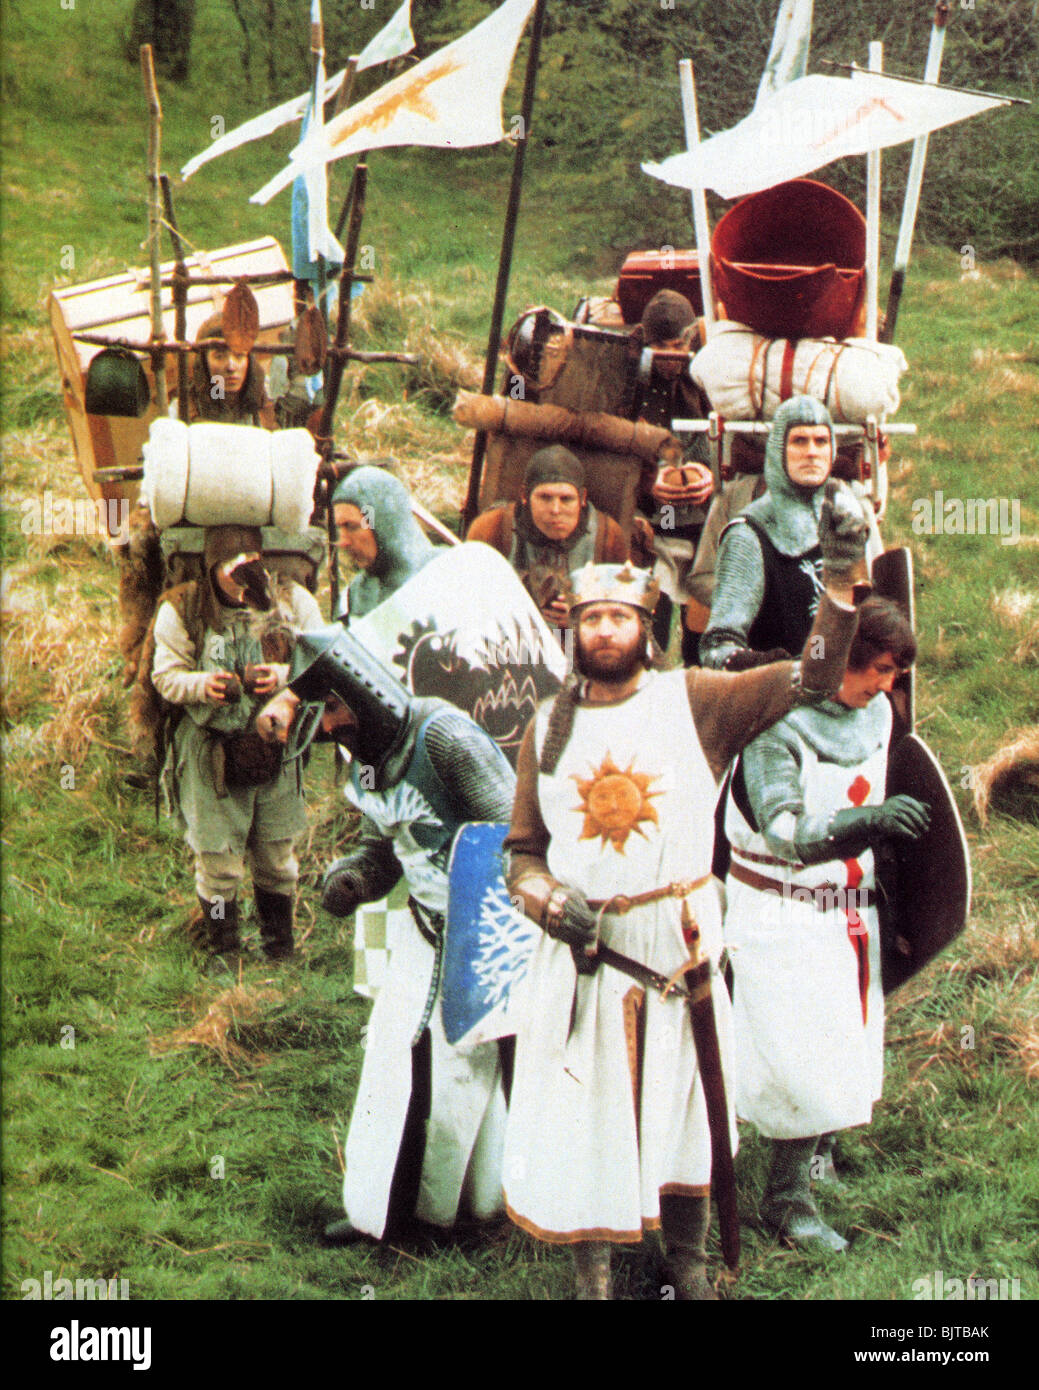 MONTY PYTHON AND THE HOLY GRAIL - 1975 EMI film with John Cleese at ...